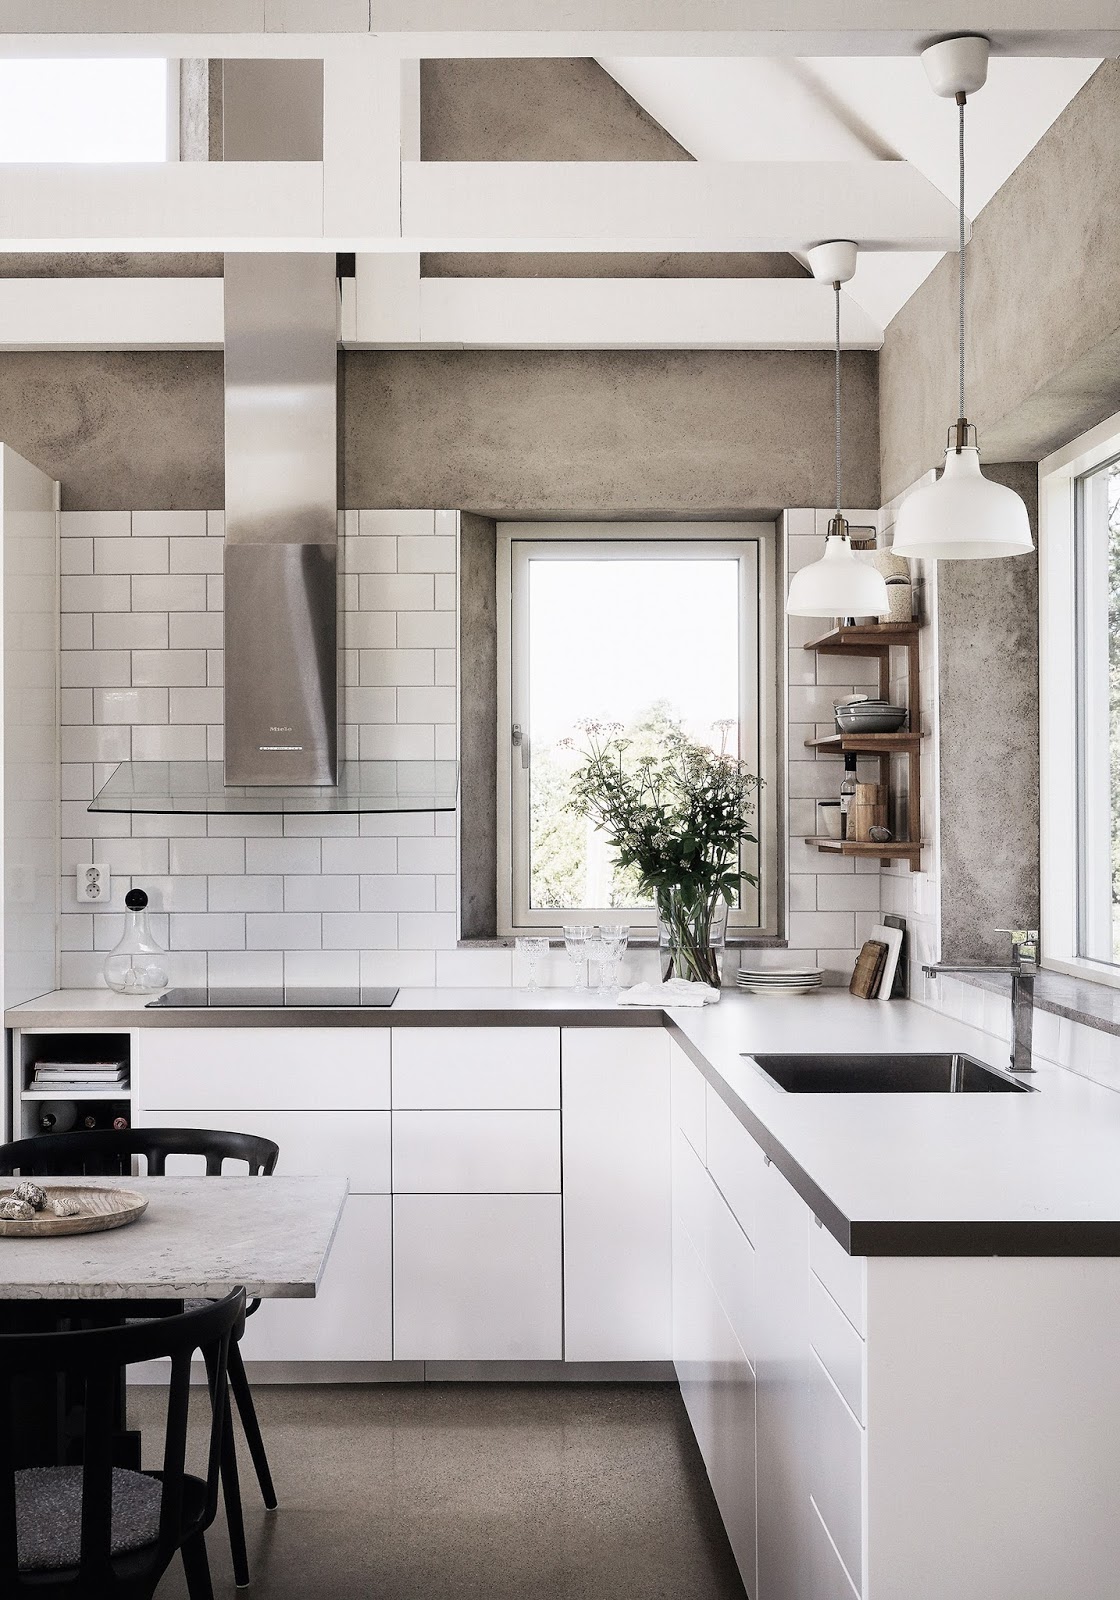 The kitchen is white and modern, concrete walls mix with white tiles and cabinets